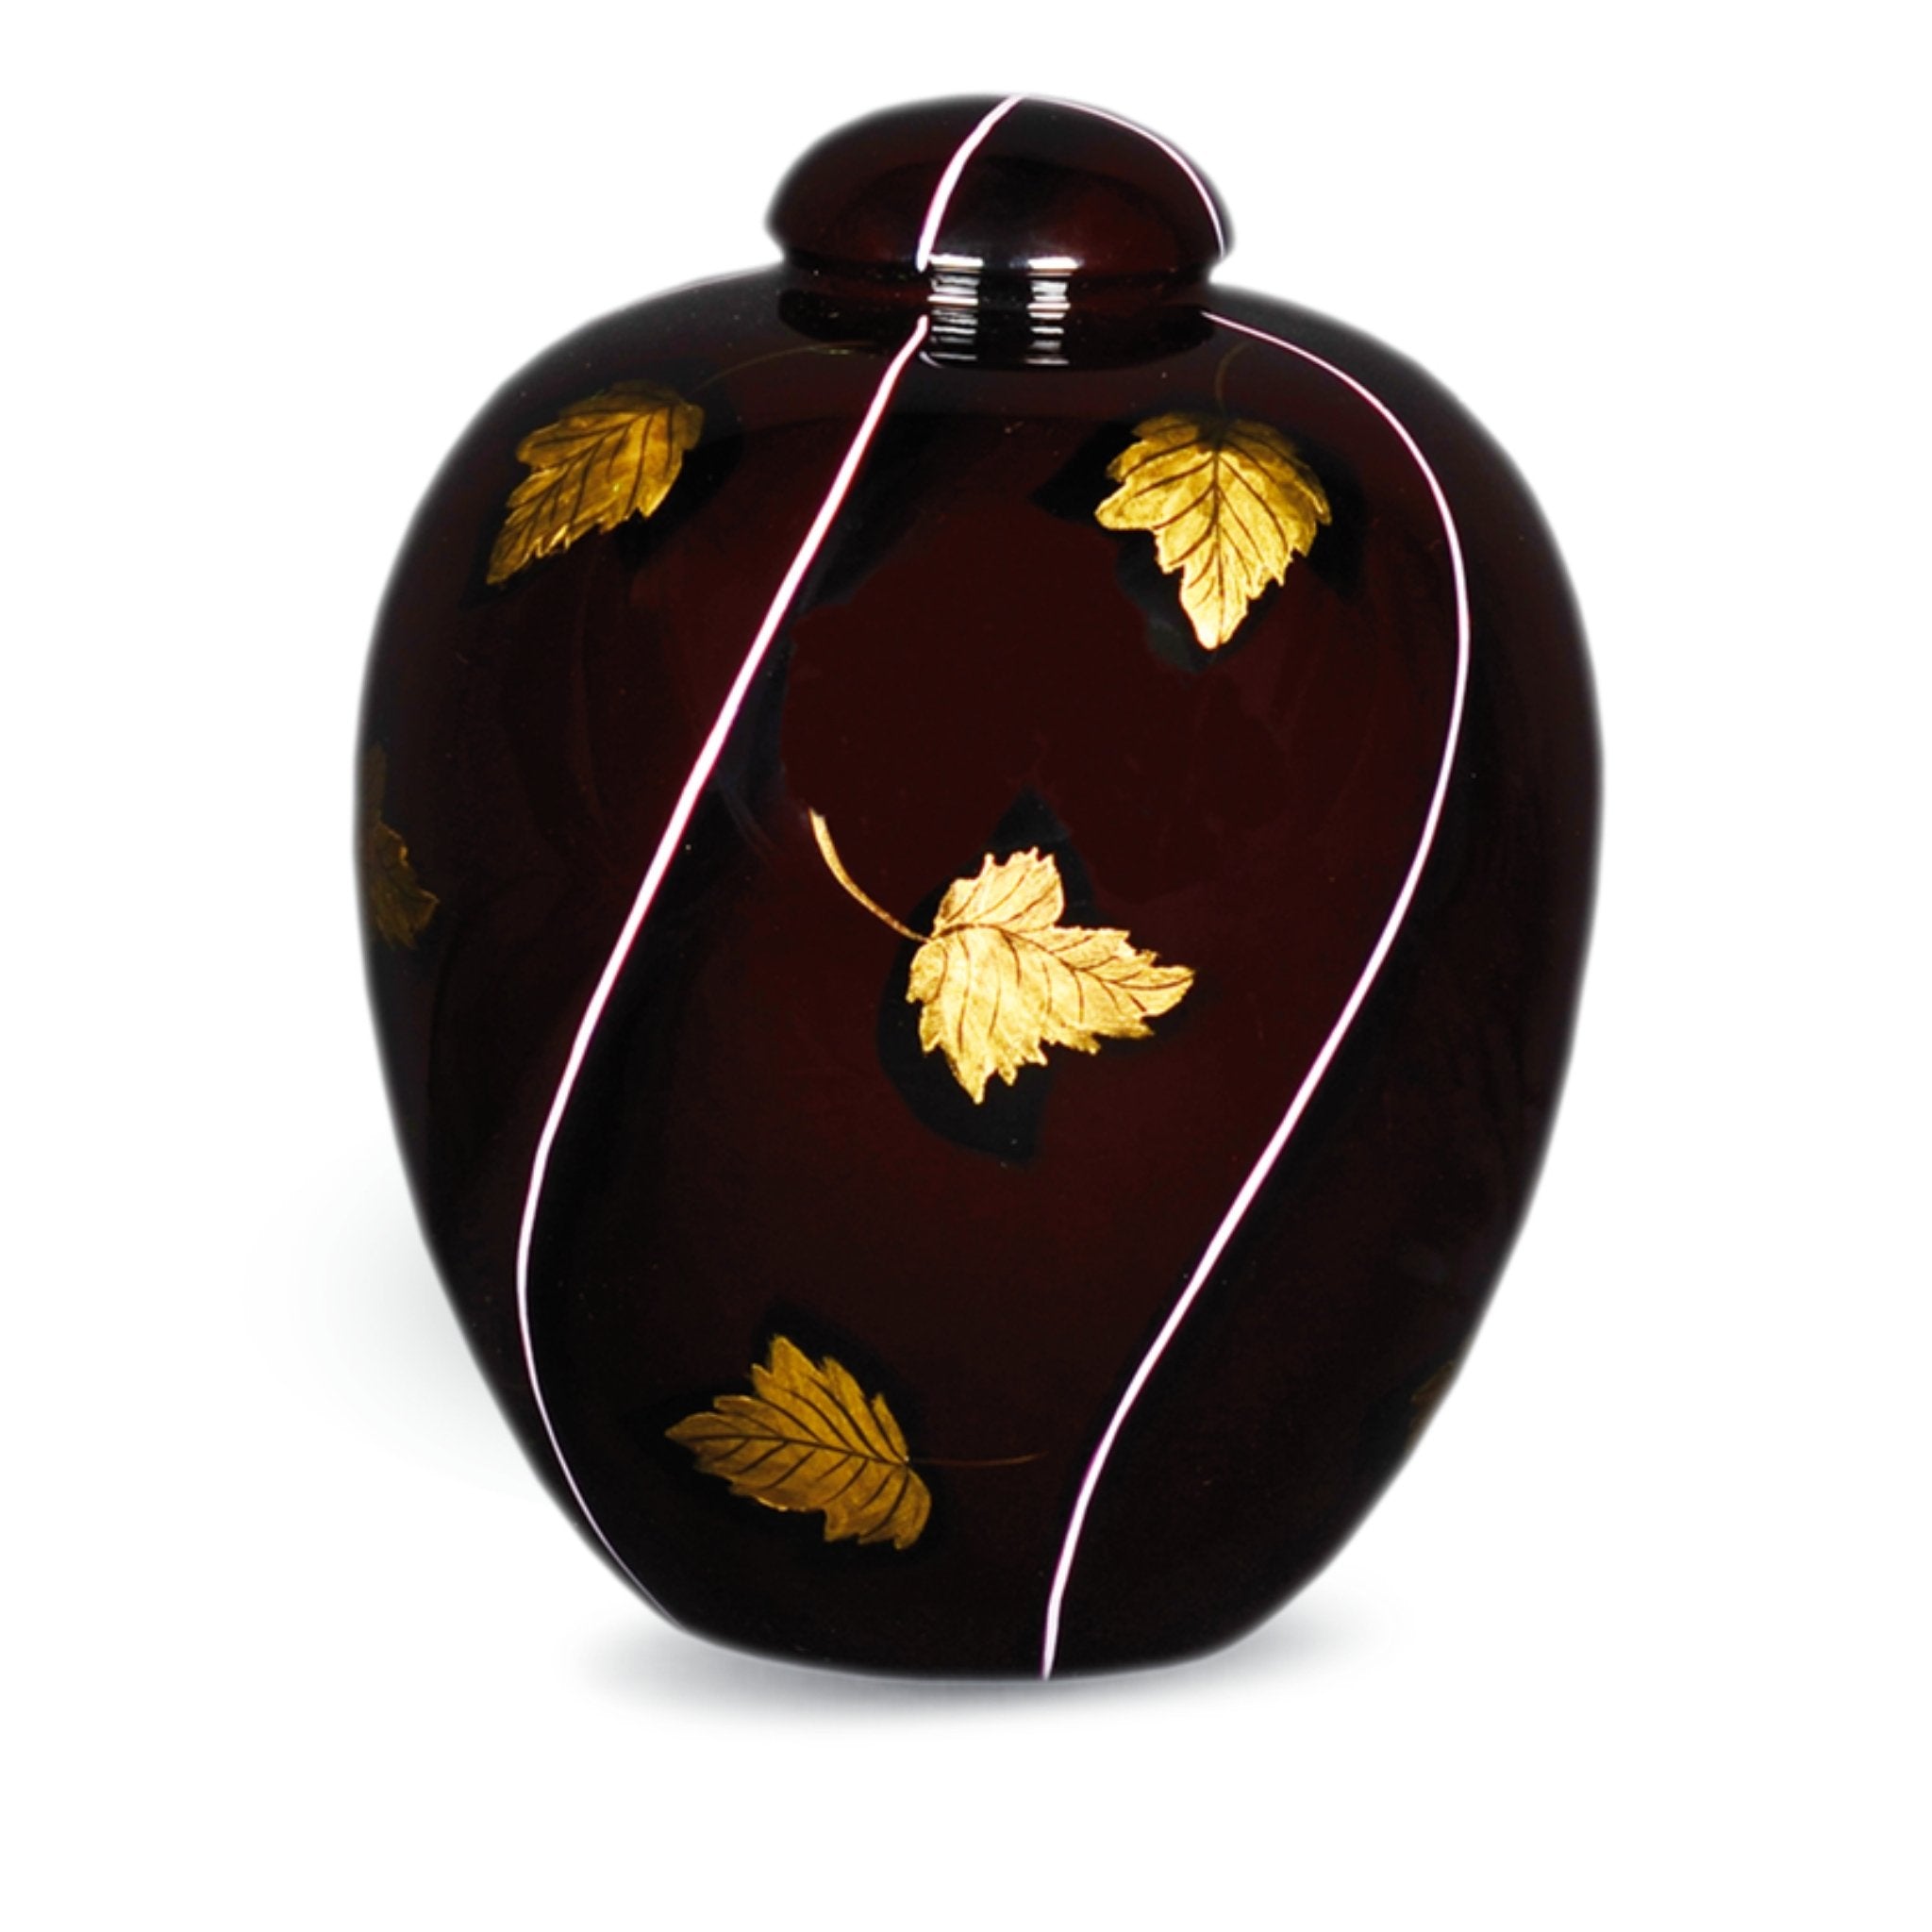 Arthill Adult Cremation Ashes Urn Brown DEL